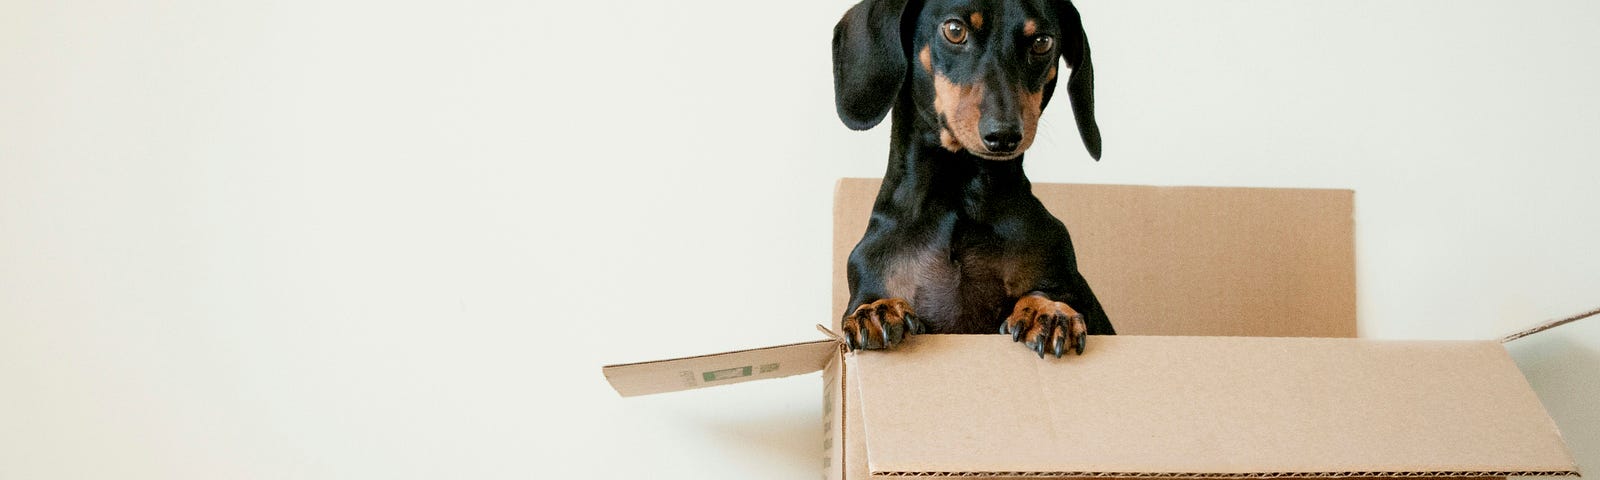 a cute dachsond dog peaks out from a packing box